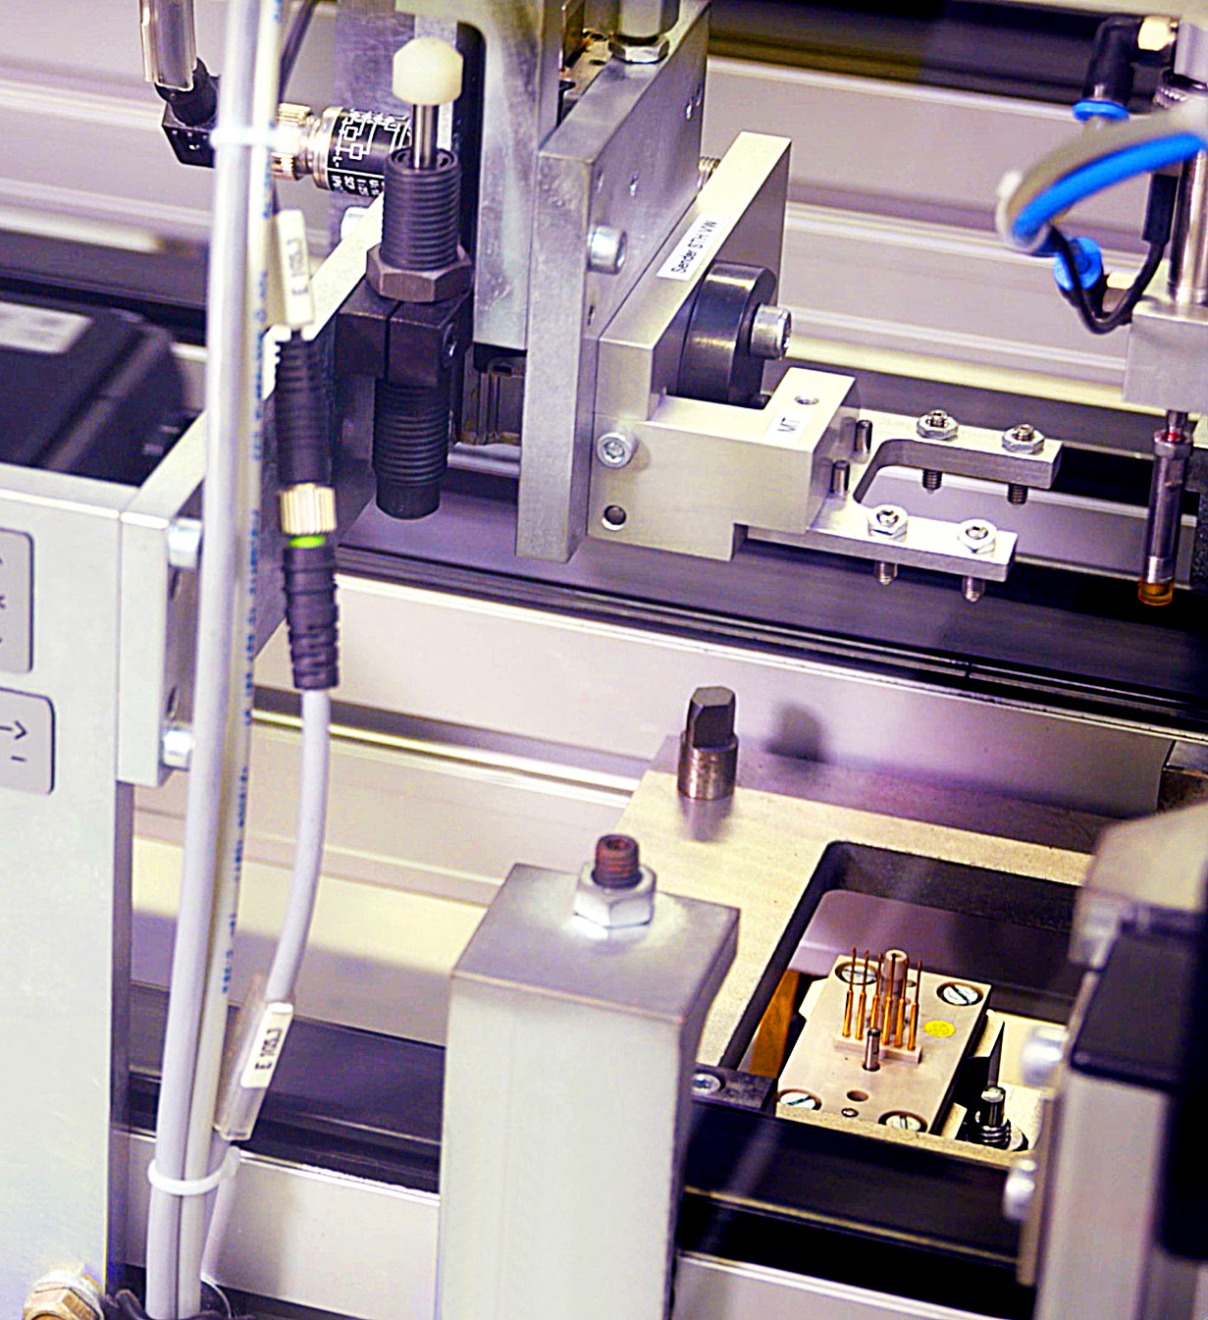 Semiautomatic production line